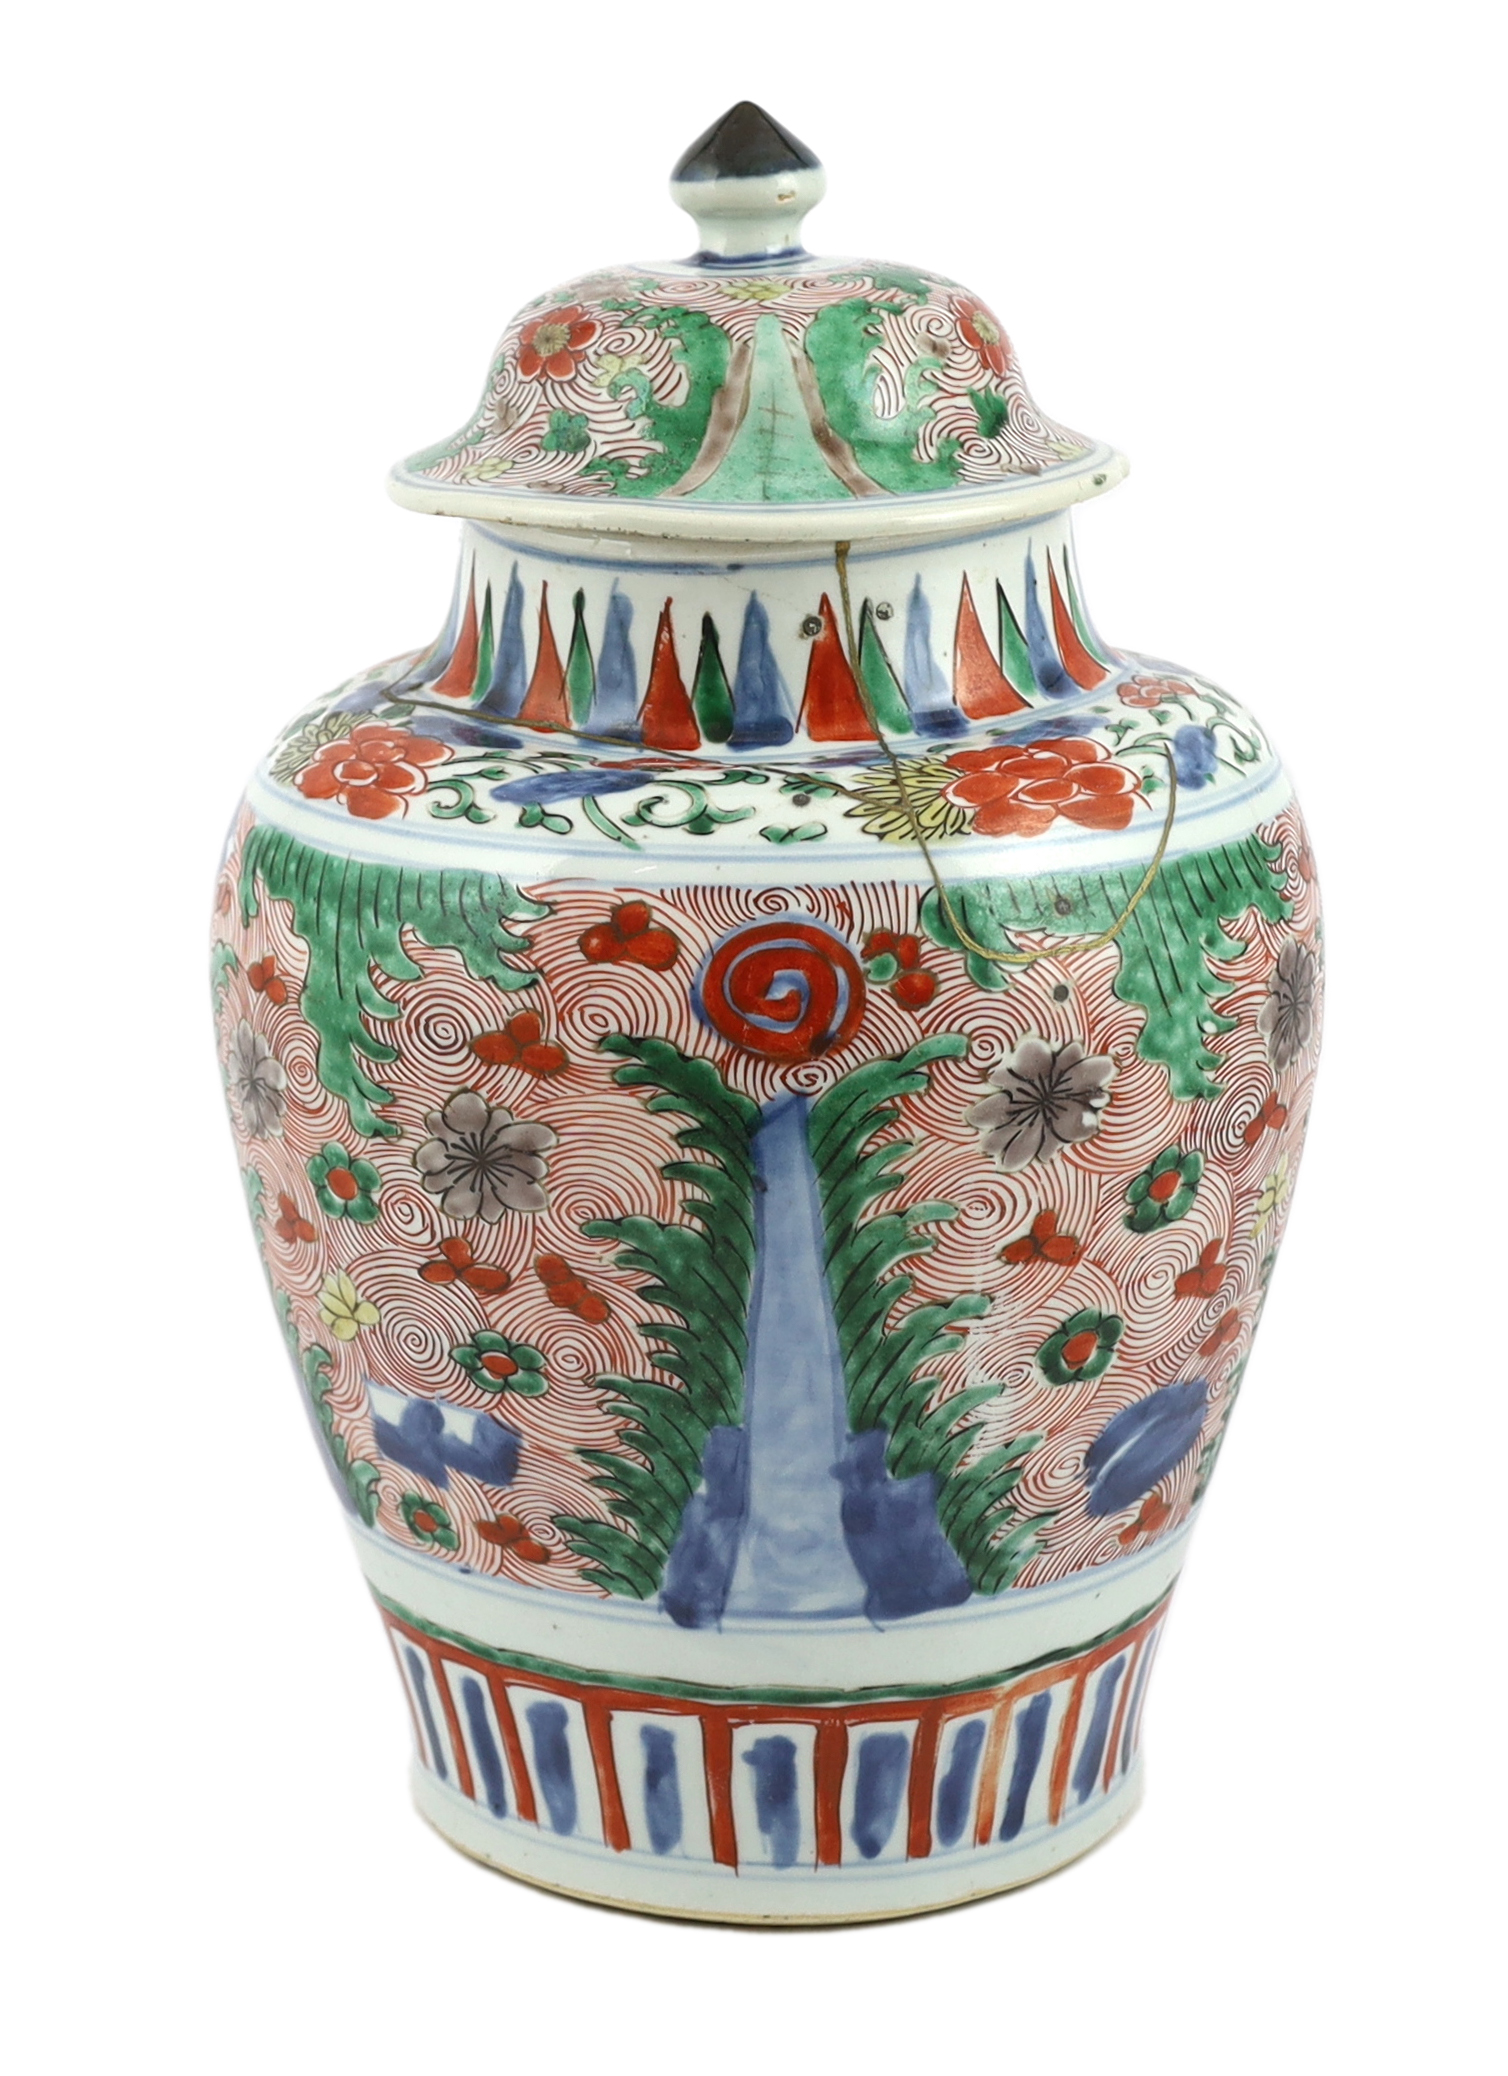 A Chinese wucai ovoid vase and cover, Transitional, Shunzhi period, broken with kintsugi style repair                                                                                                                       